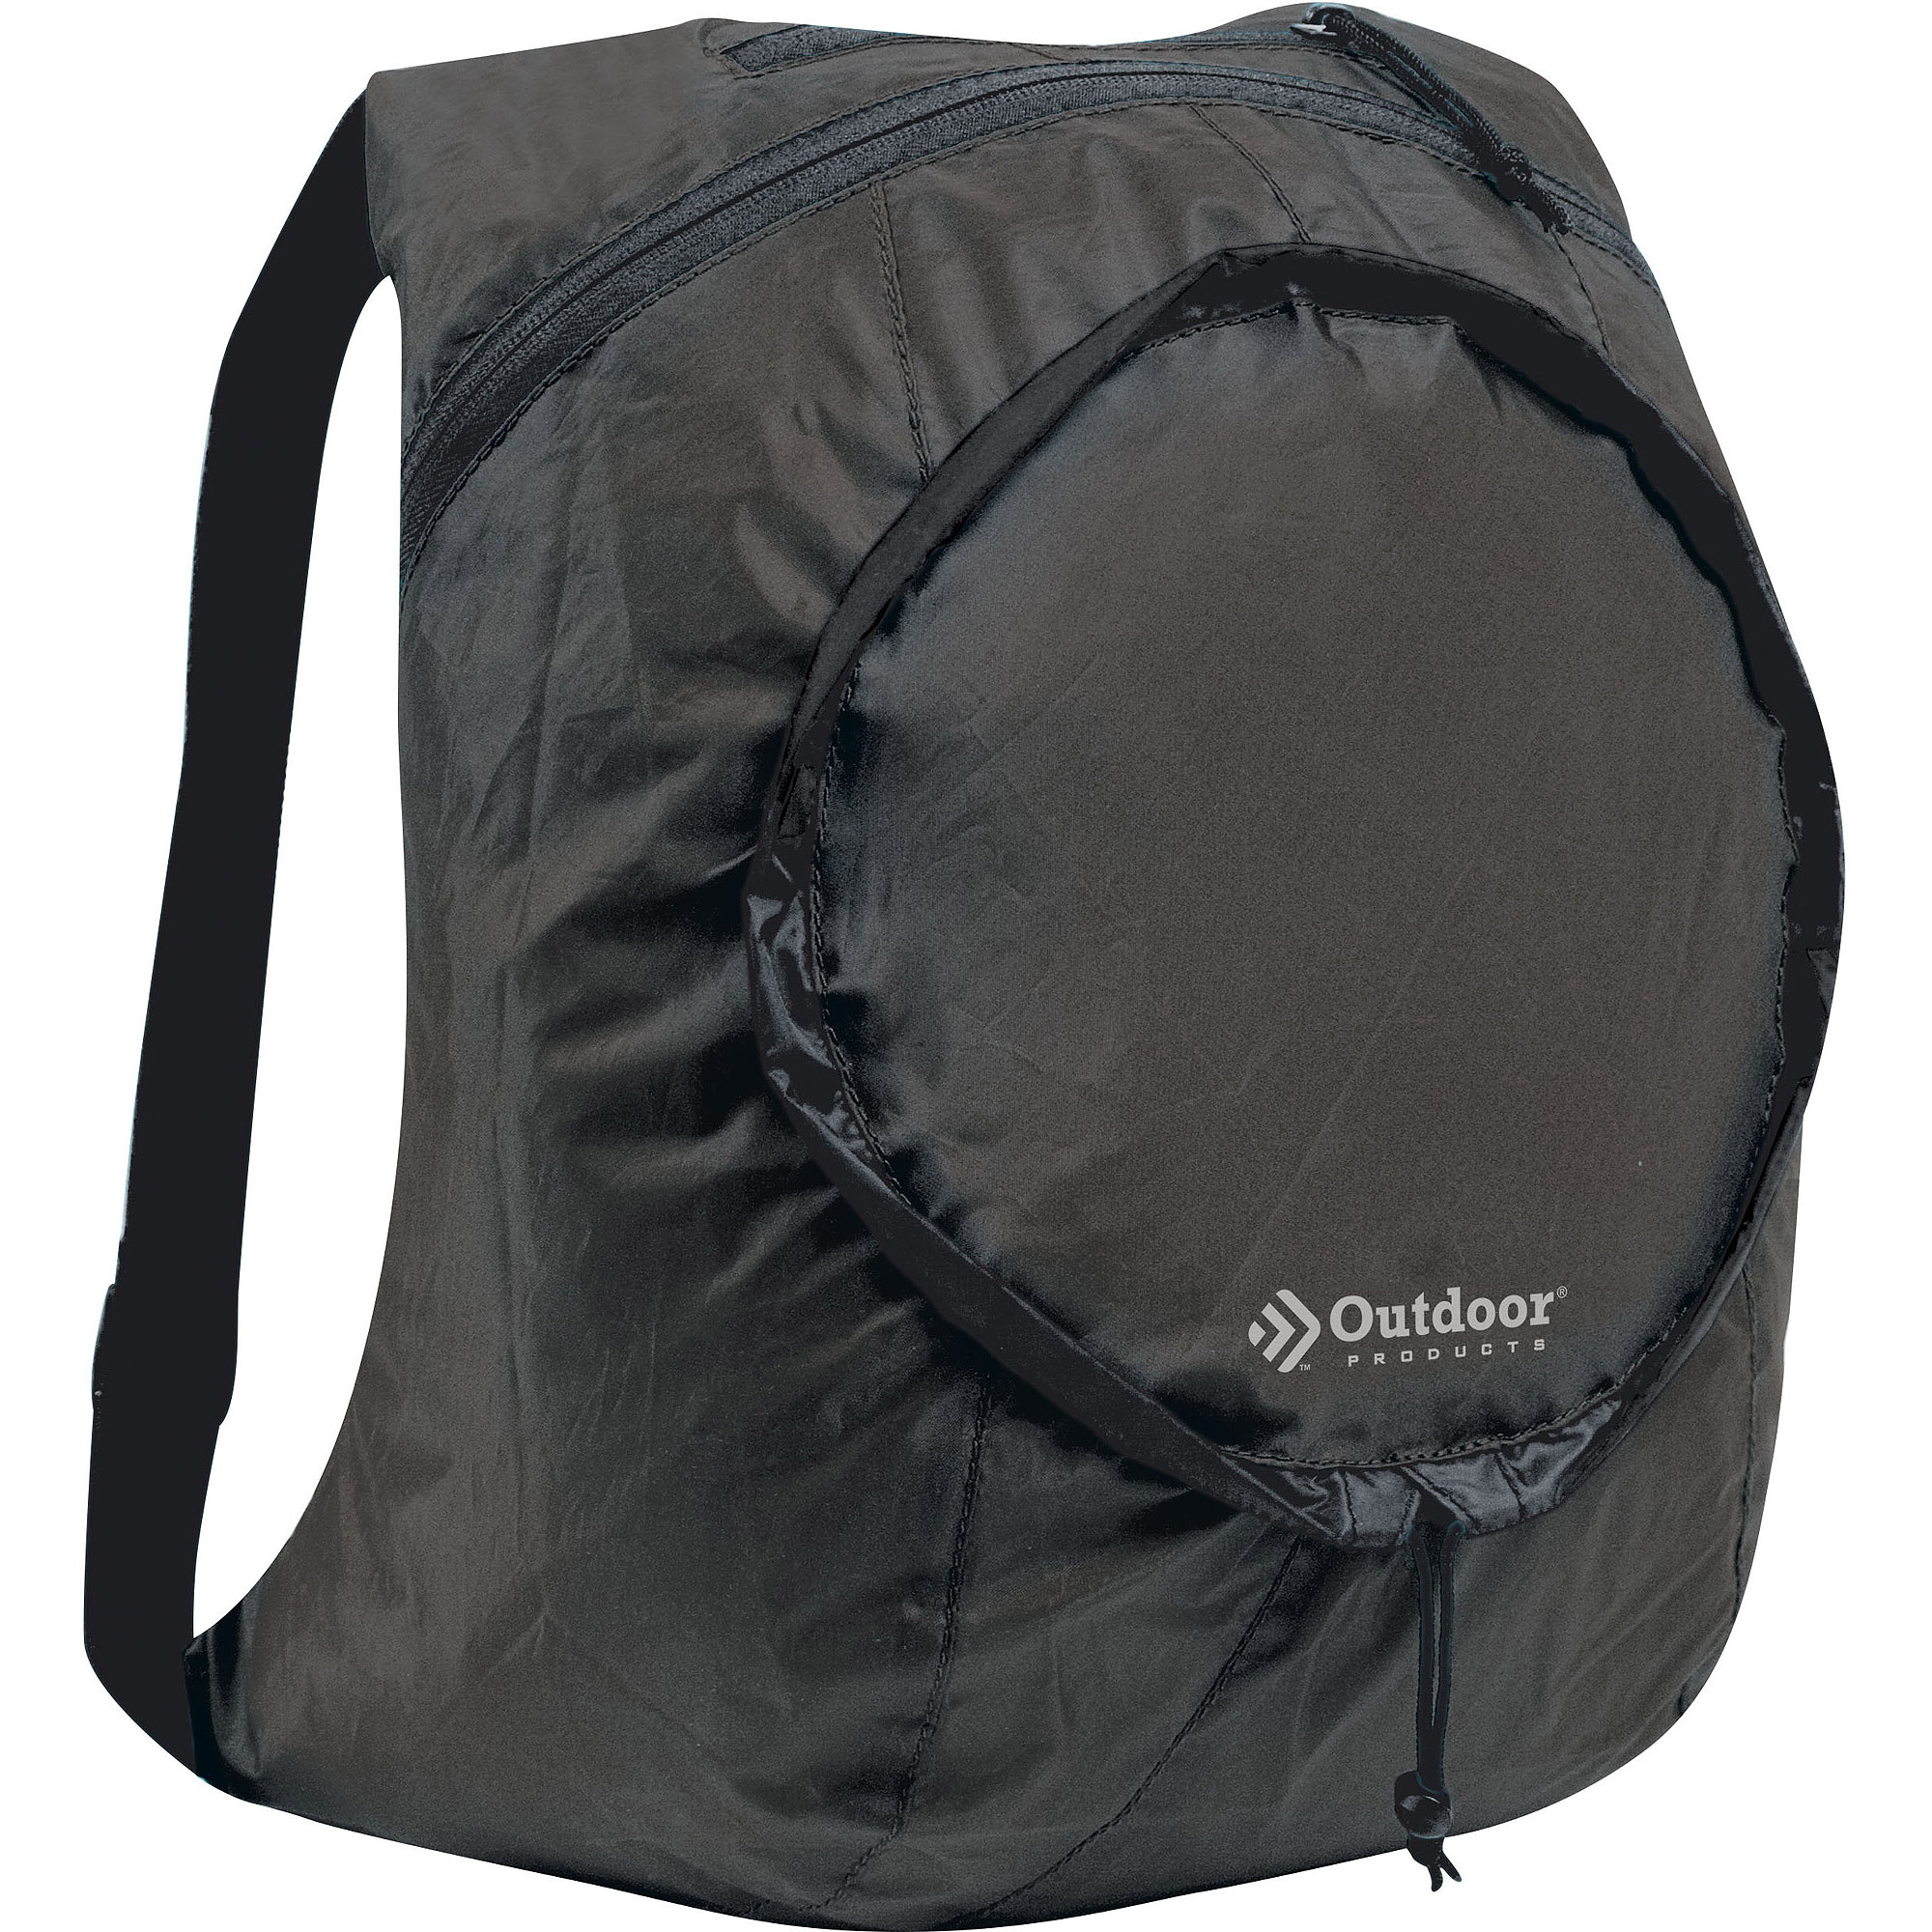 Outdoor Products 14 Ltr Packable Backpack, Black, Unisex, Adult, Teen, Polyester - image 1 of 9